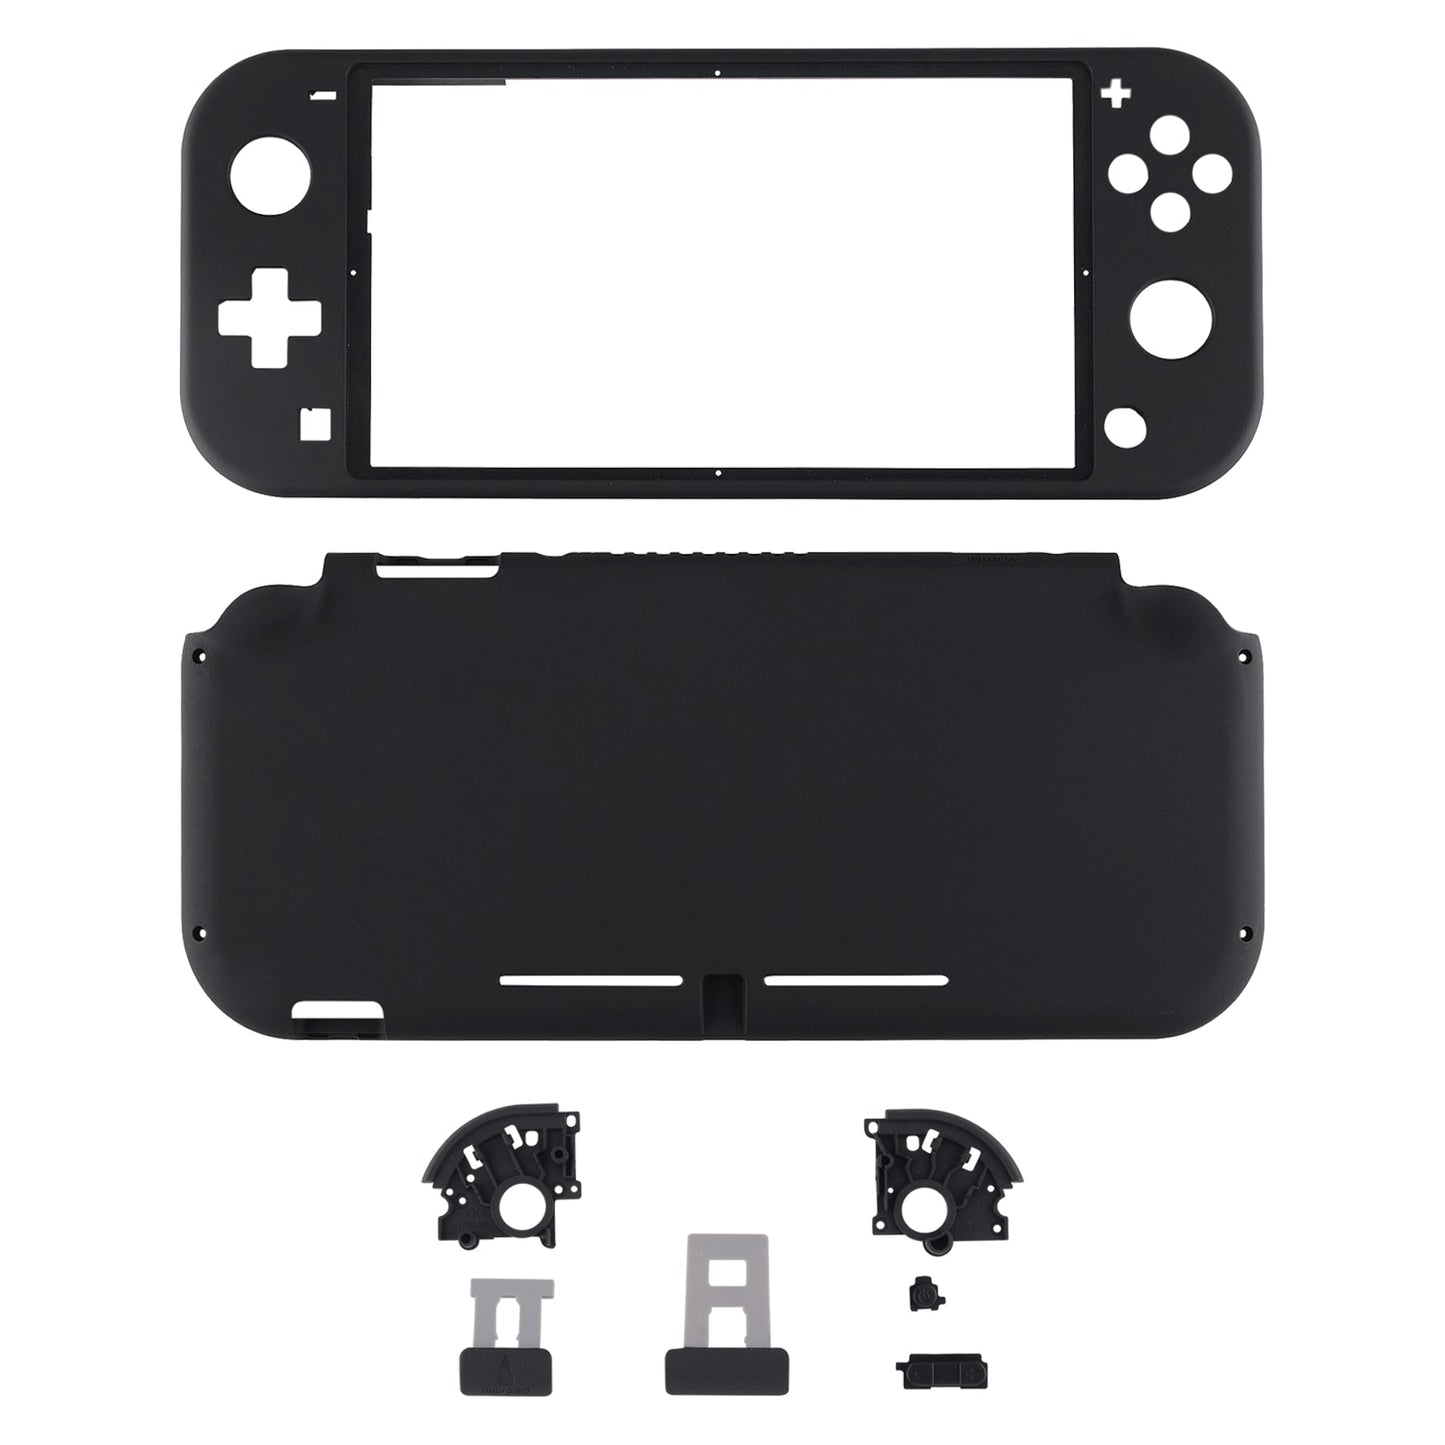 eXtremeRate Retail Soft Touch Black DIY Replacement Shell for Nintendo Switch Lite, NSL Handheld Controller Housing with Screen Protector, Custom Case Cover for Nintendo Switch Lite - DLP309